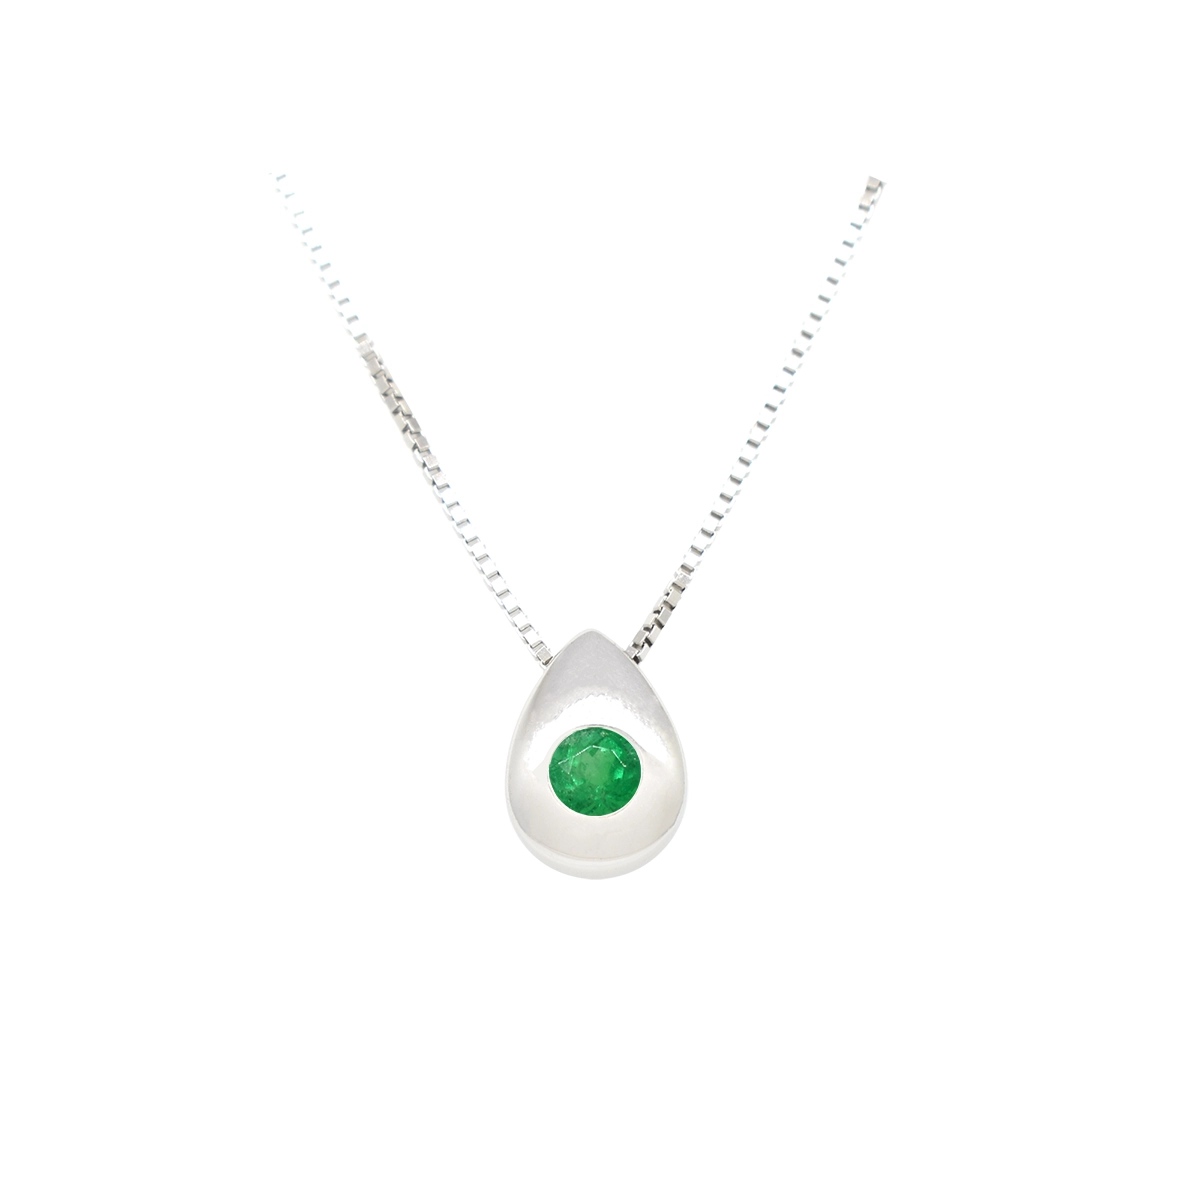 Emerald Necklace in 18K White Gold with Genuine Round Cut Emerald